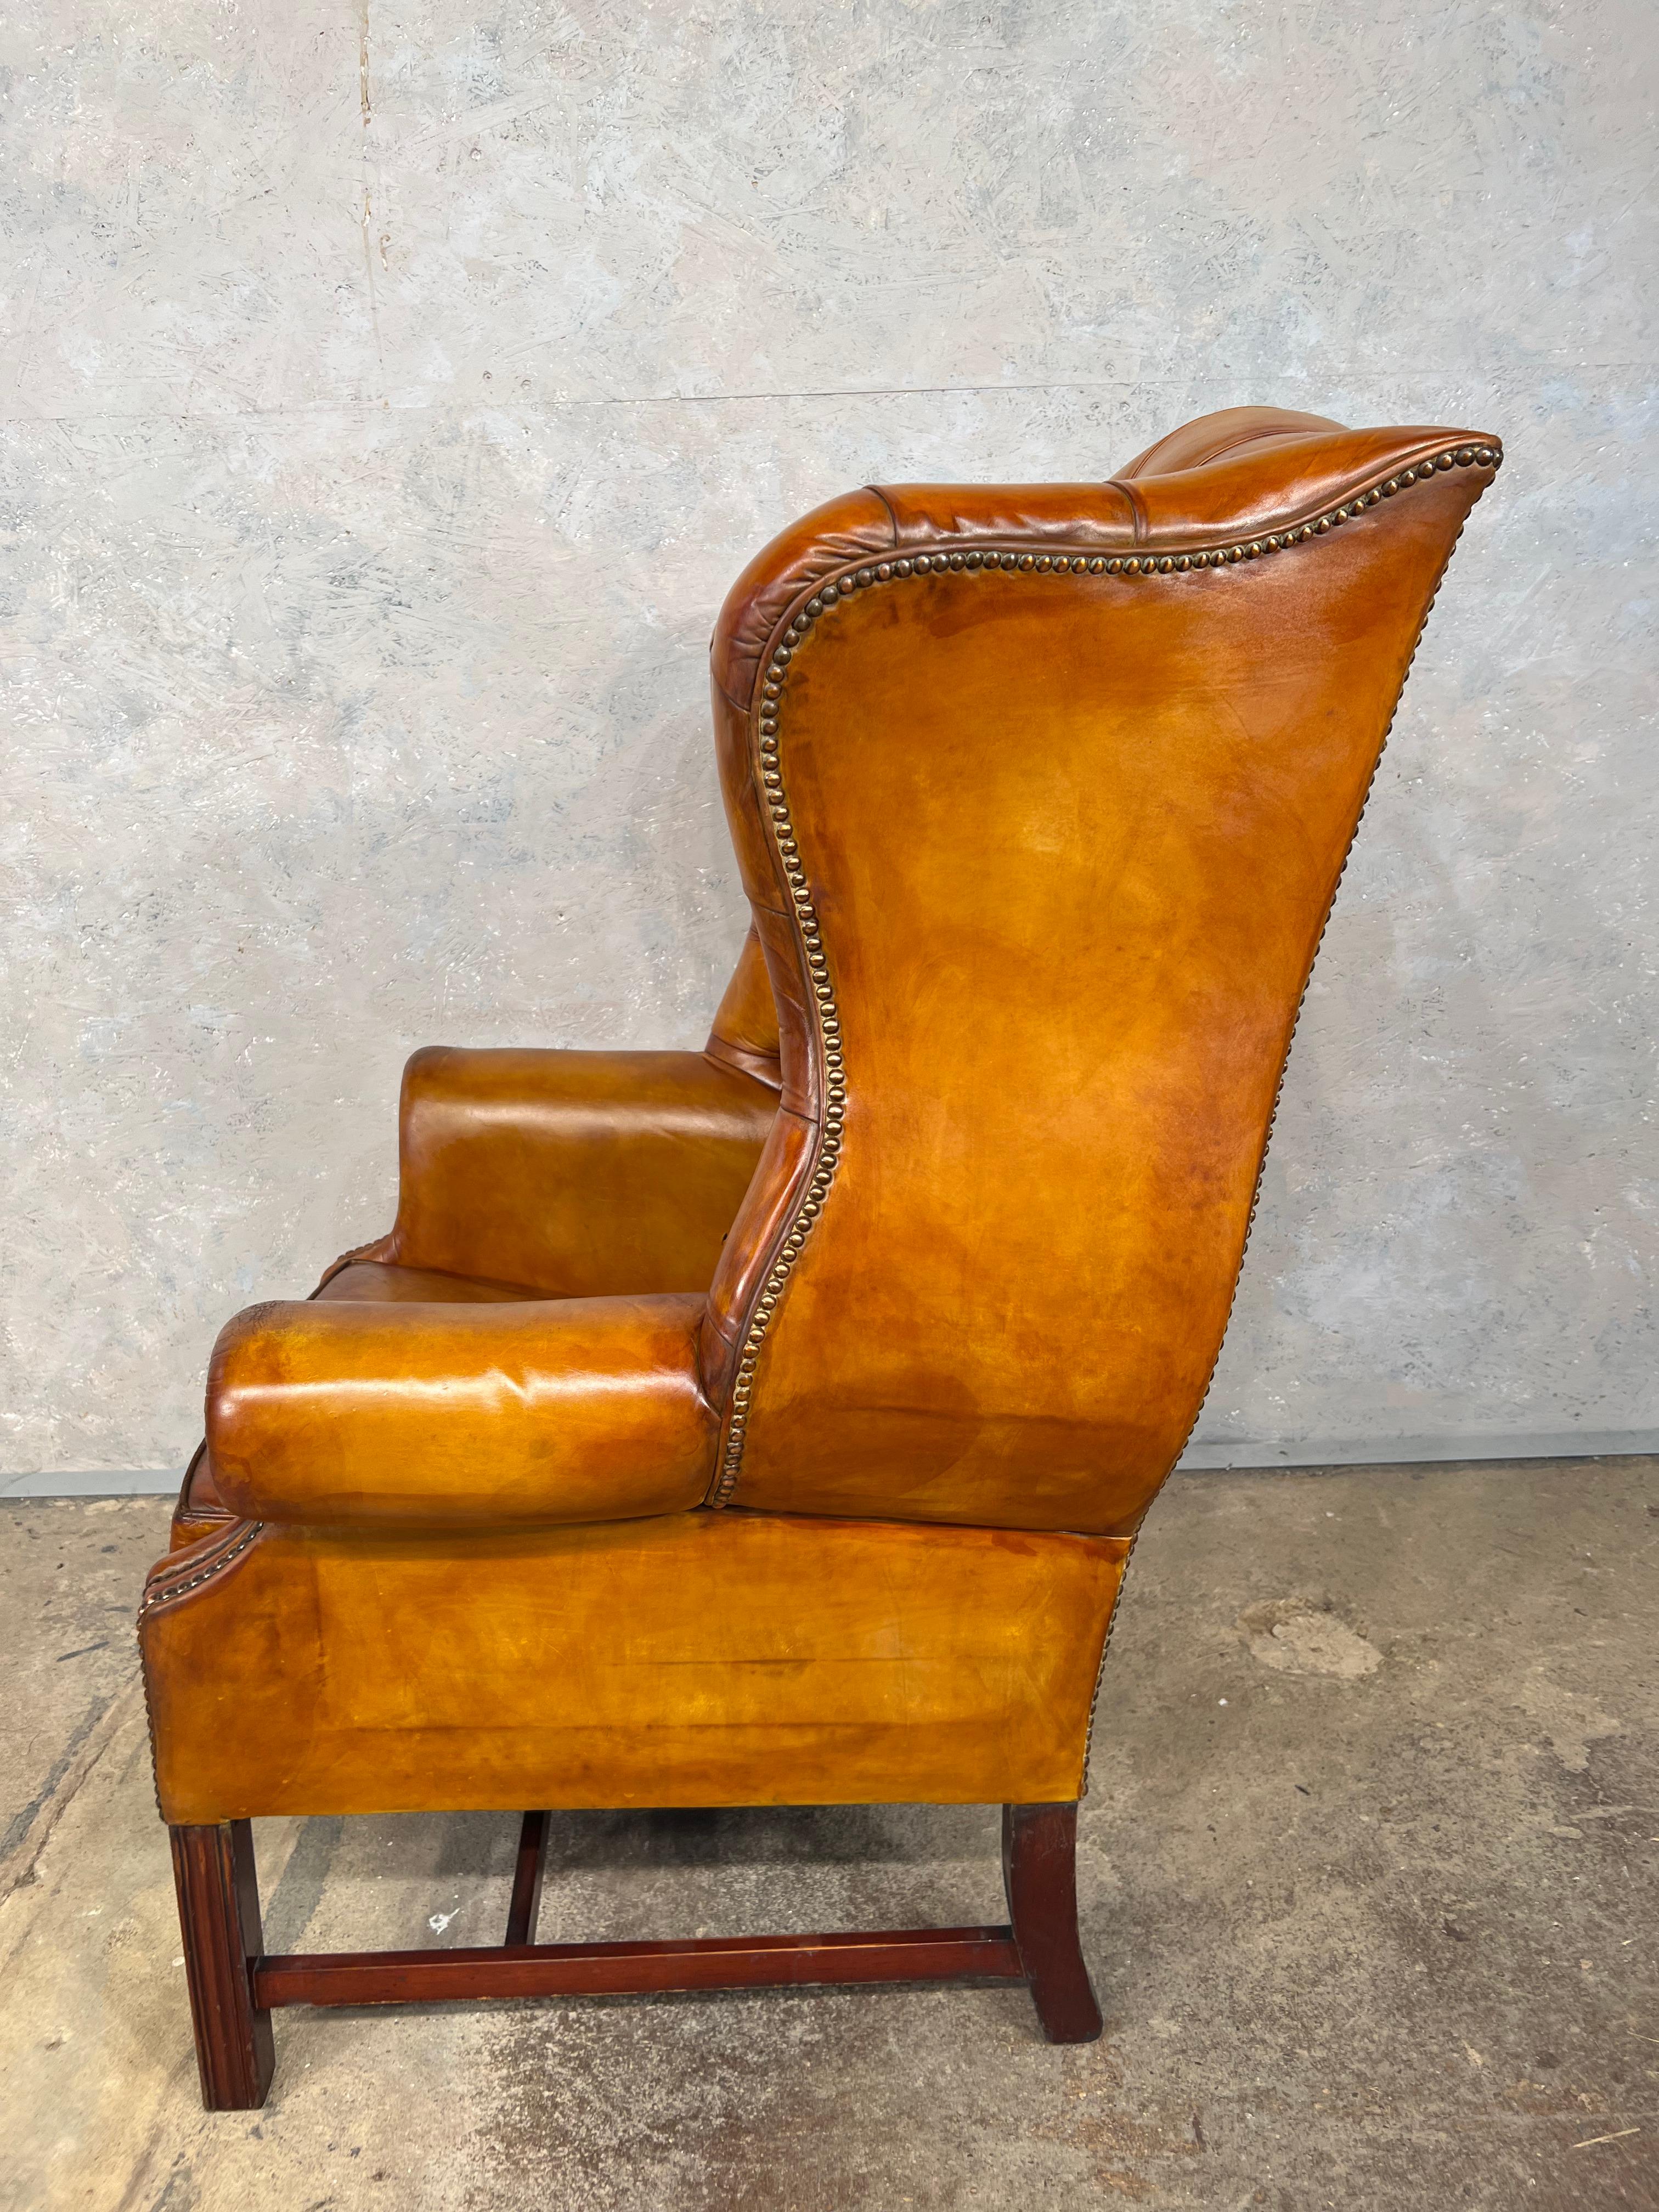 Exceptional Mid C Wide Back Leather Wing Back Chair Chesterfield Light Tan #500 5